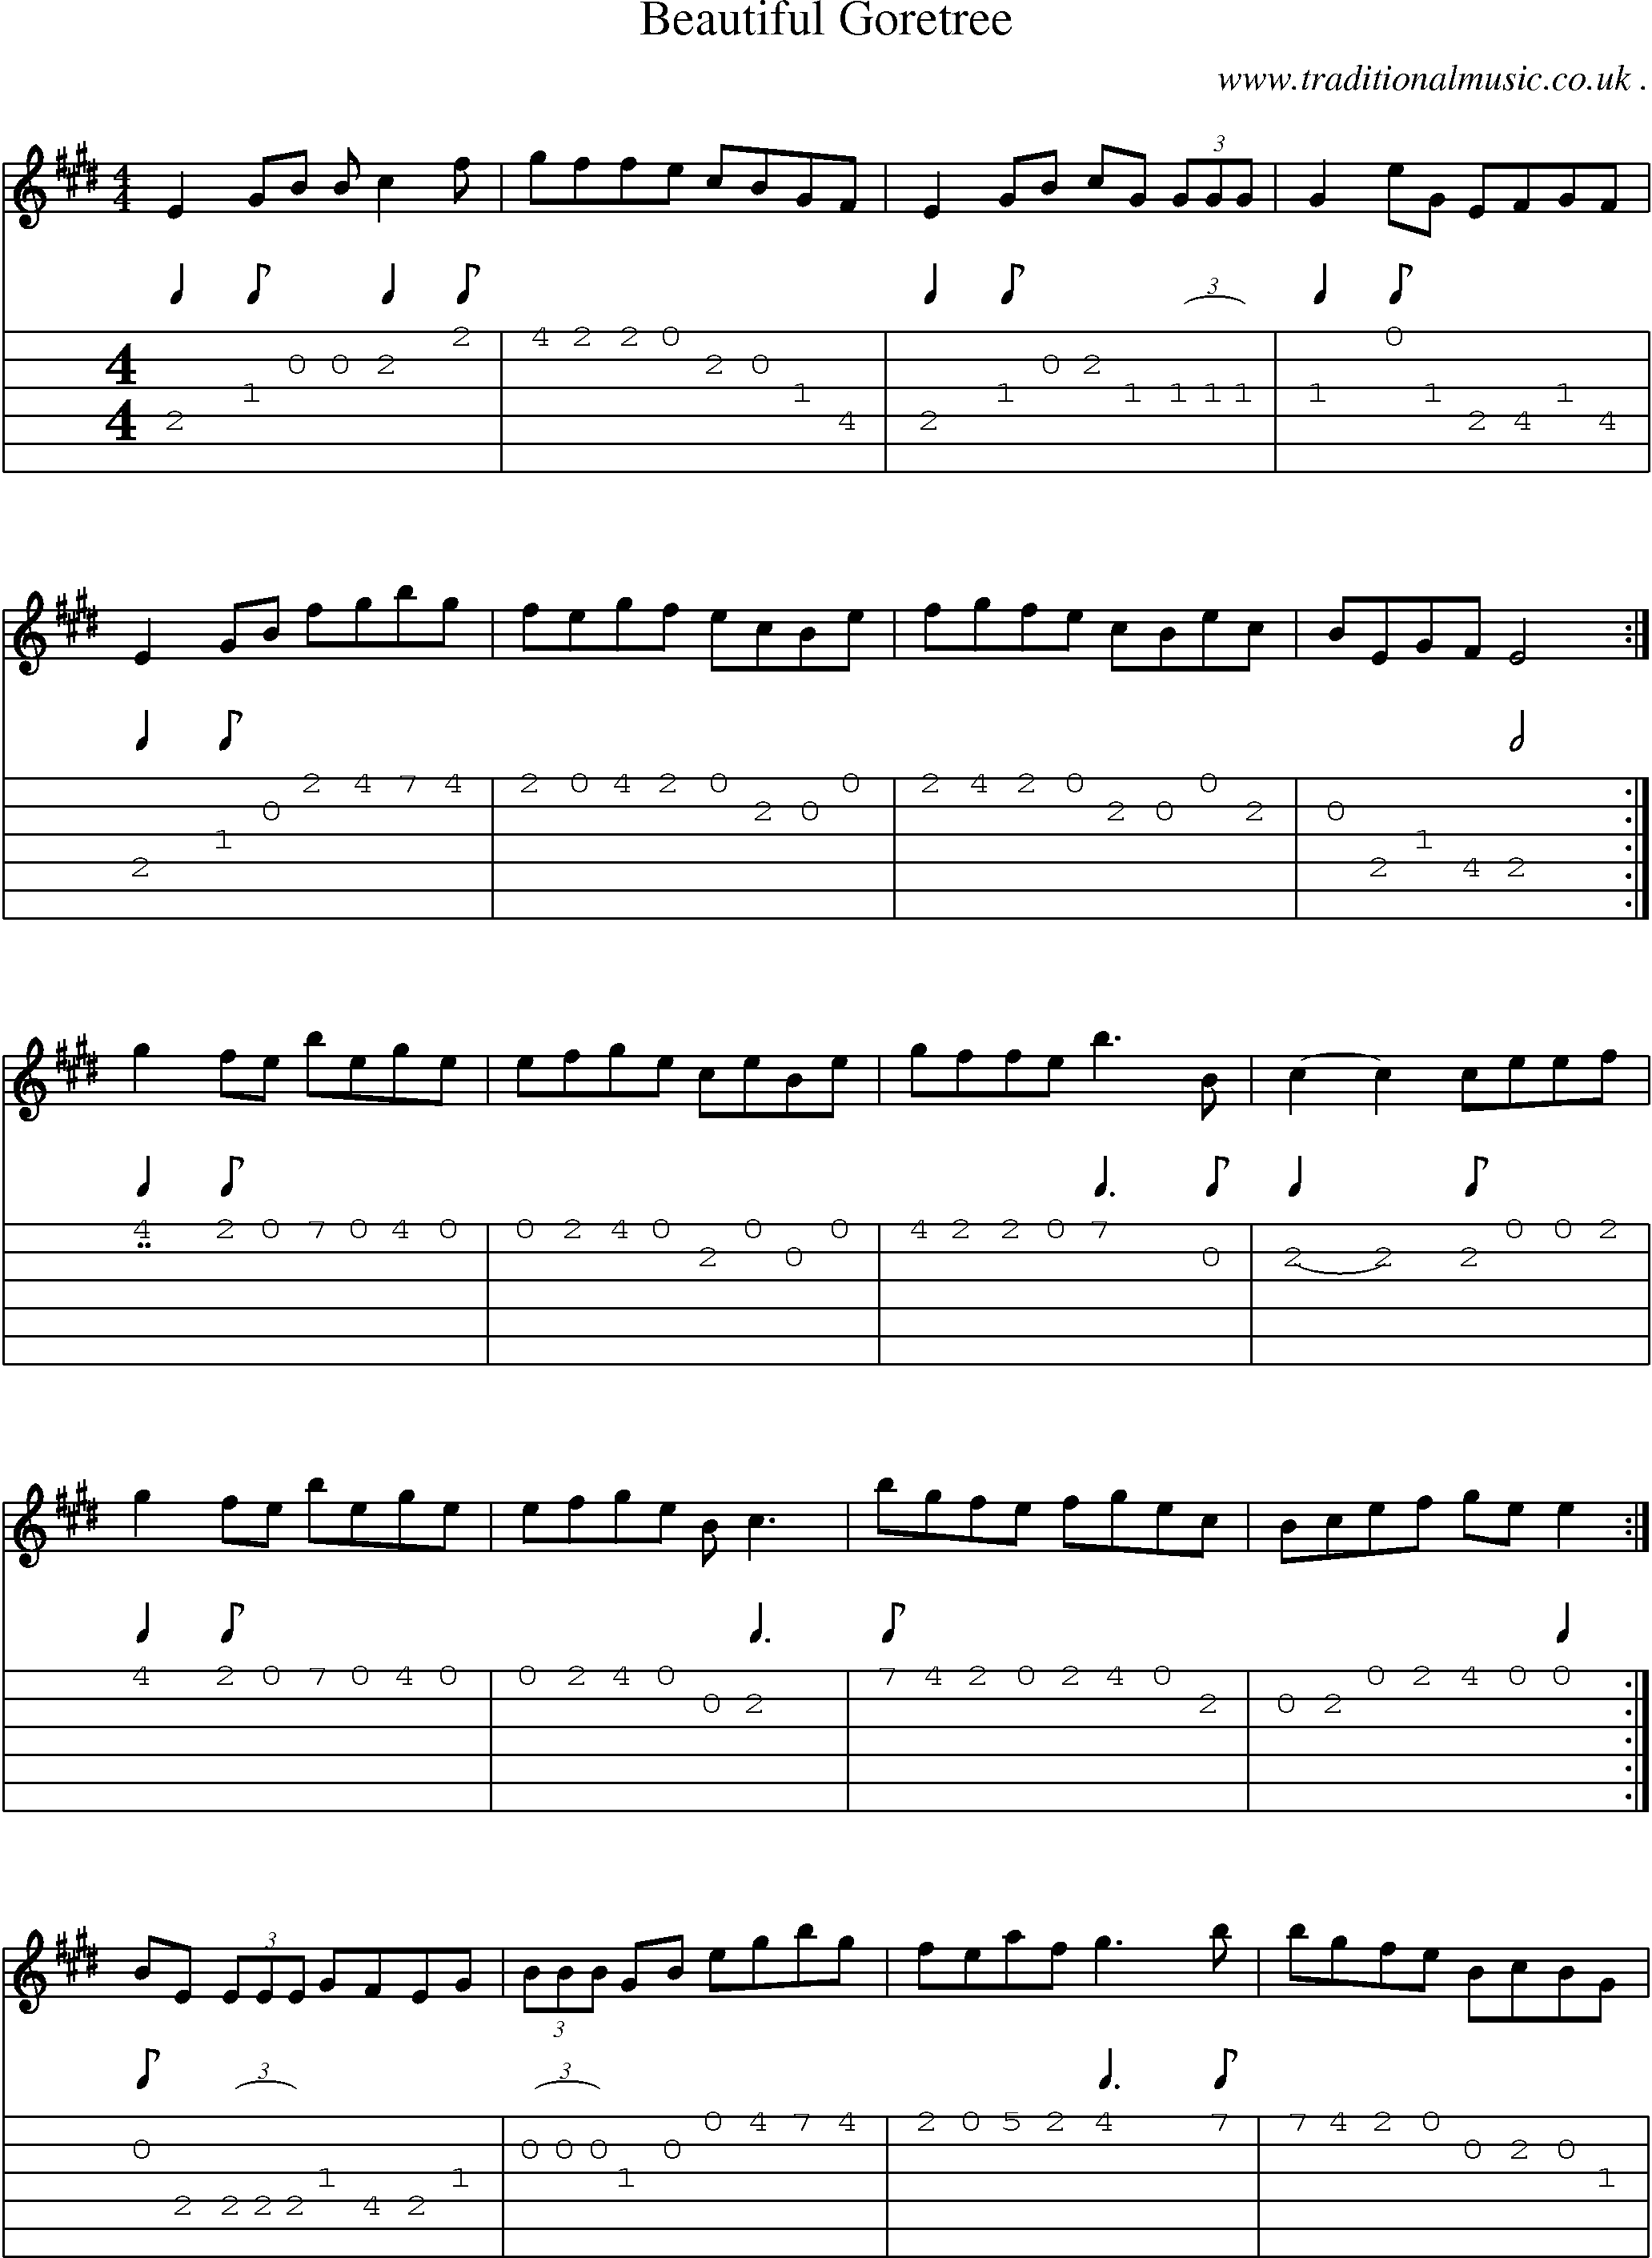 Sheet-Music and Guitar Tabs for Beautiful Goretree